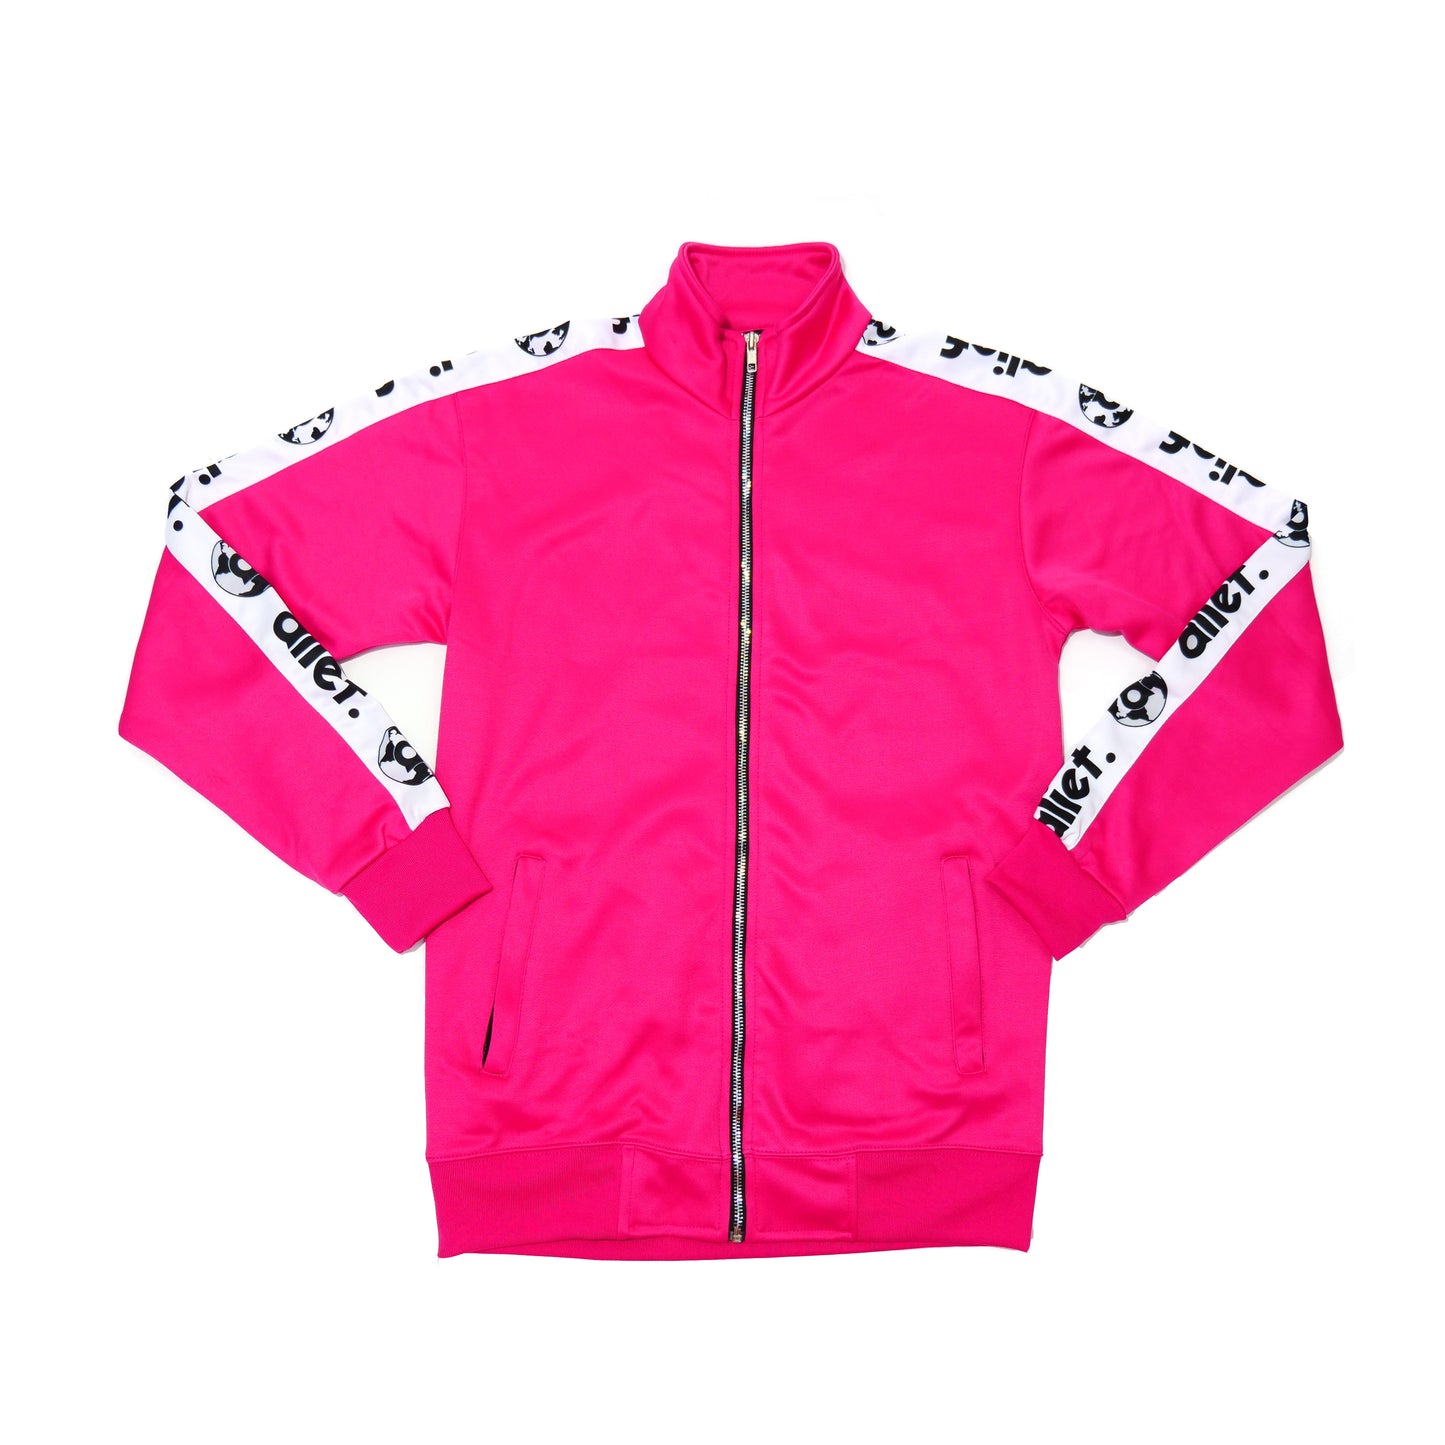 Alief Tracksuit - Pink